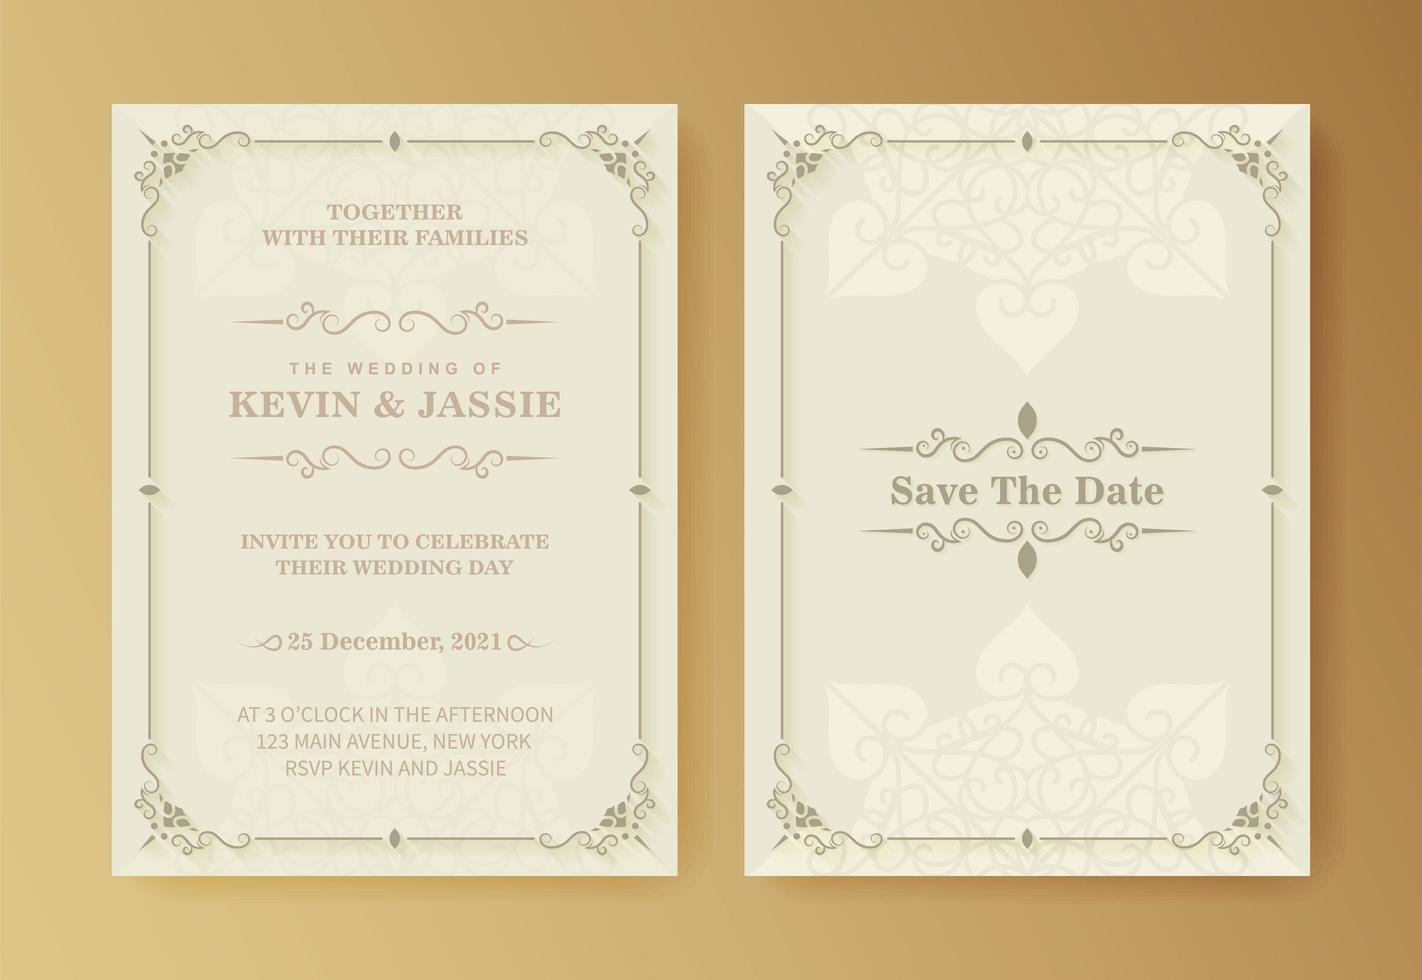 https://static.vecteezy.com/system/resources/previews/001/406/460/non_2x/retro-wedding-invitation-on-white-background-free-vector.jpg